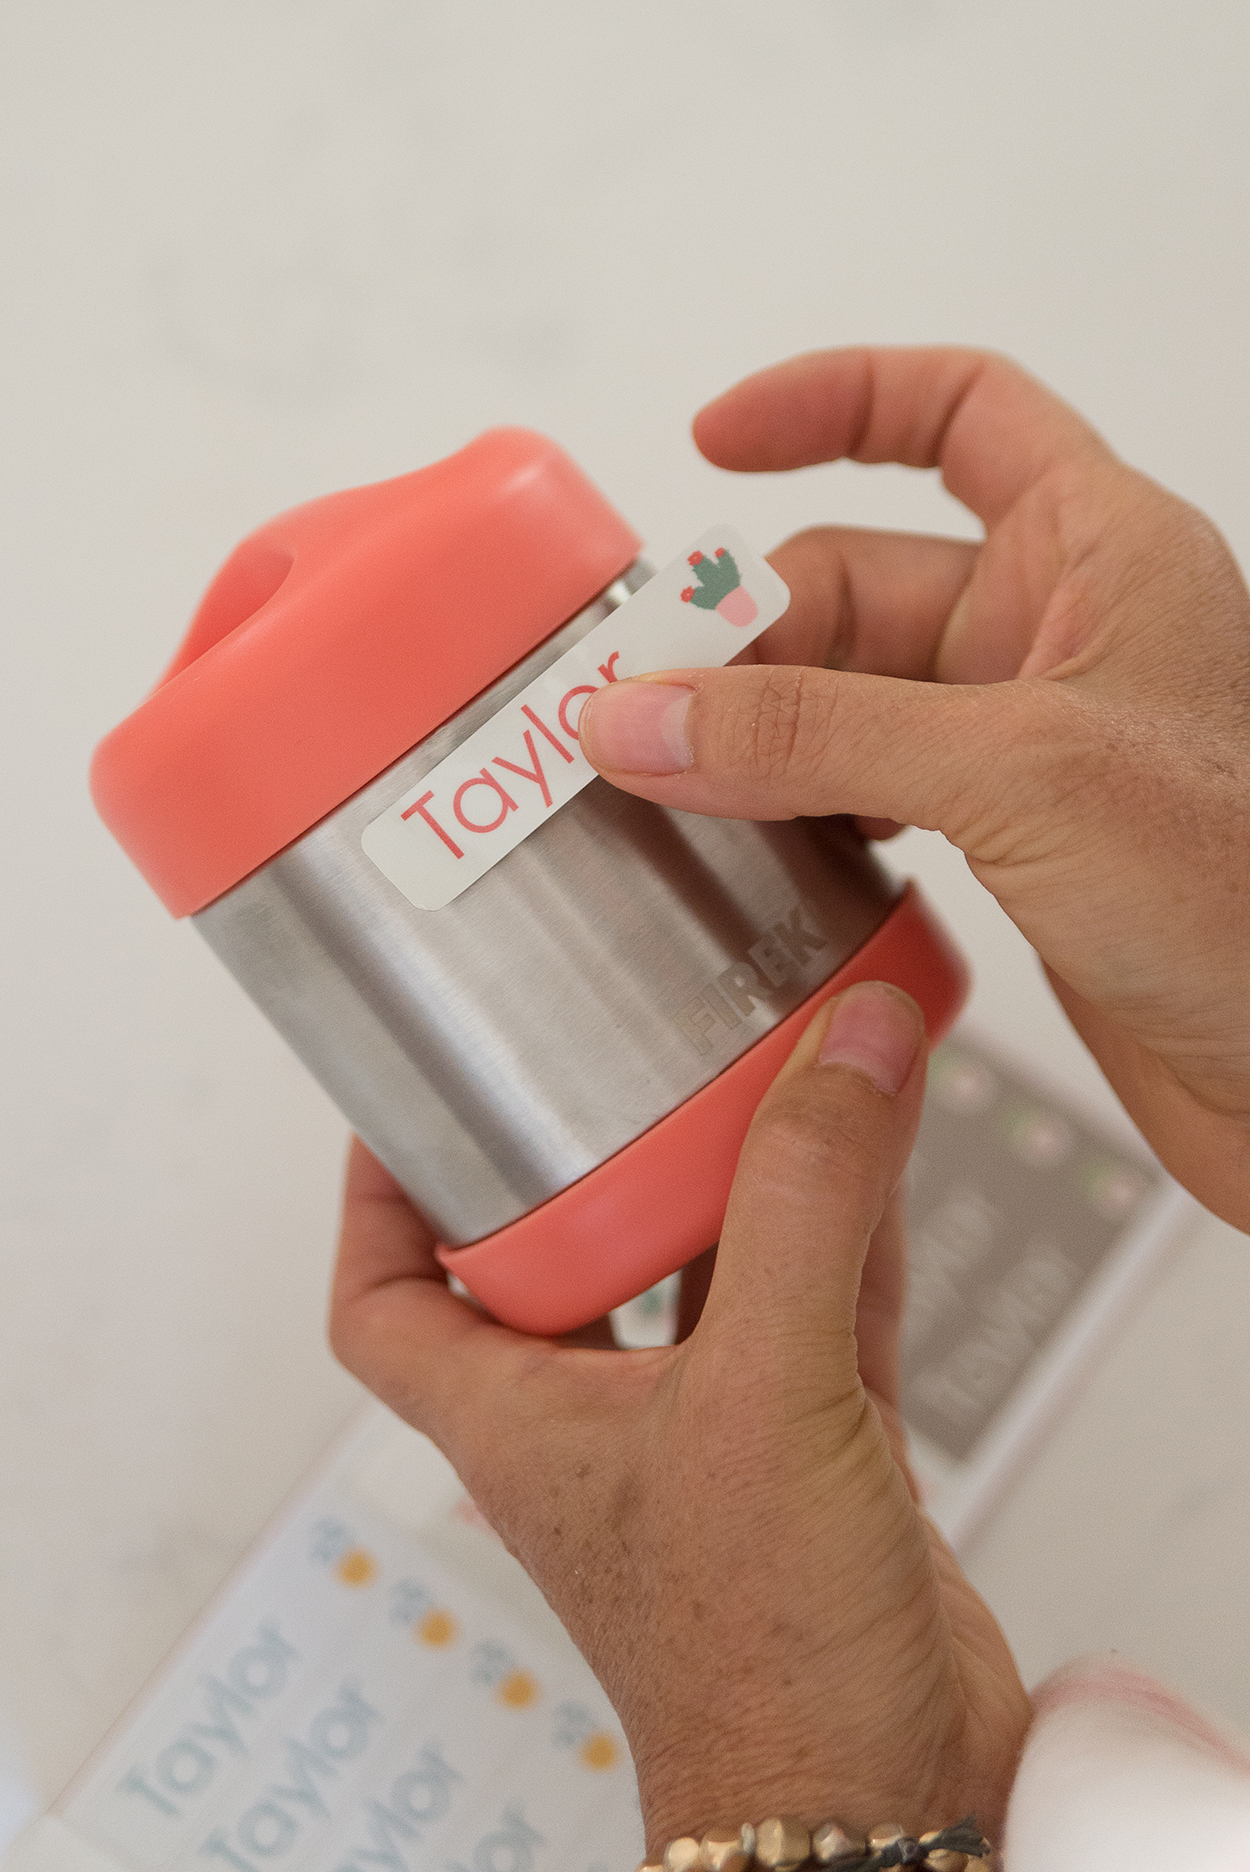 putting a name sticker on the lunch thermos